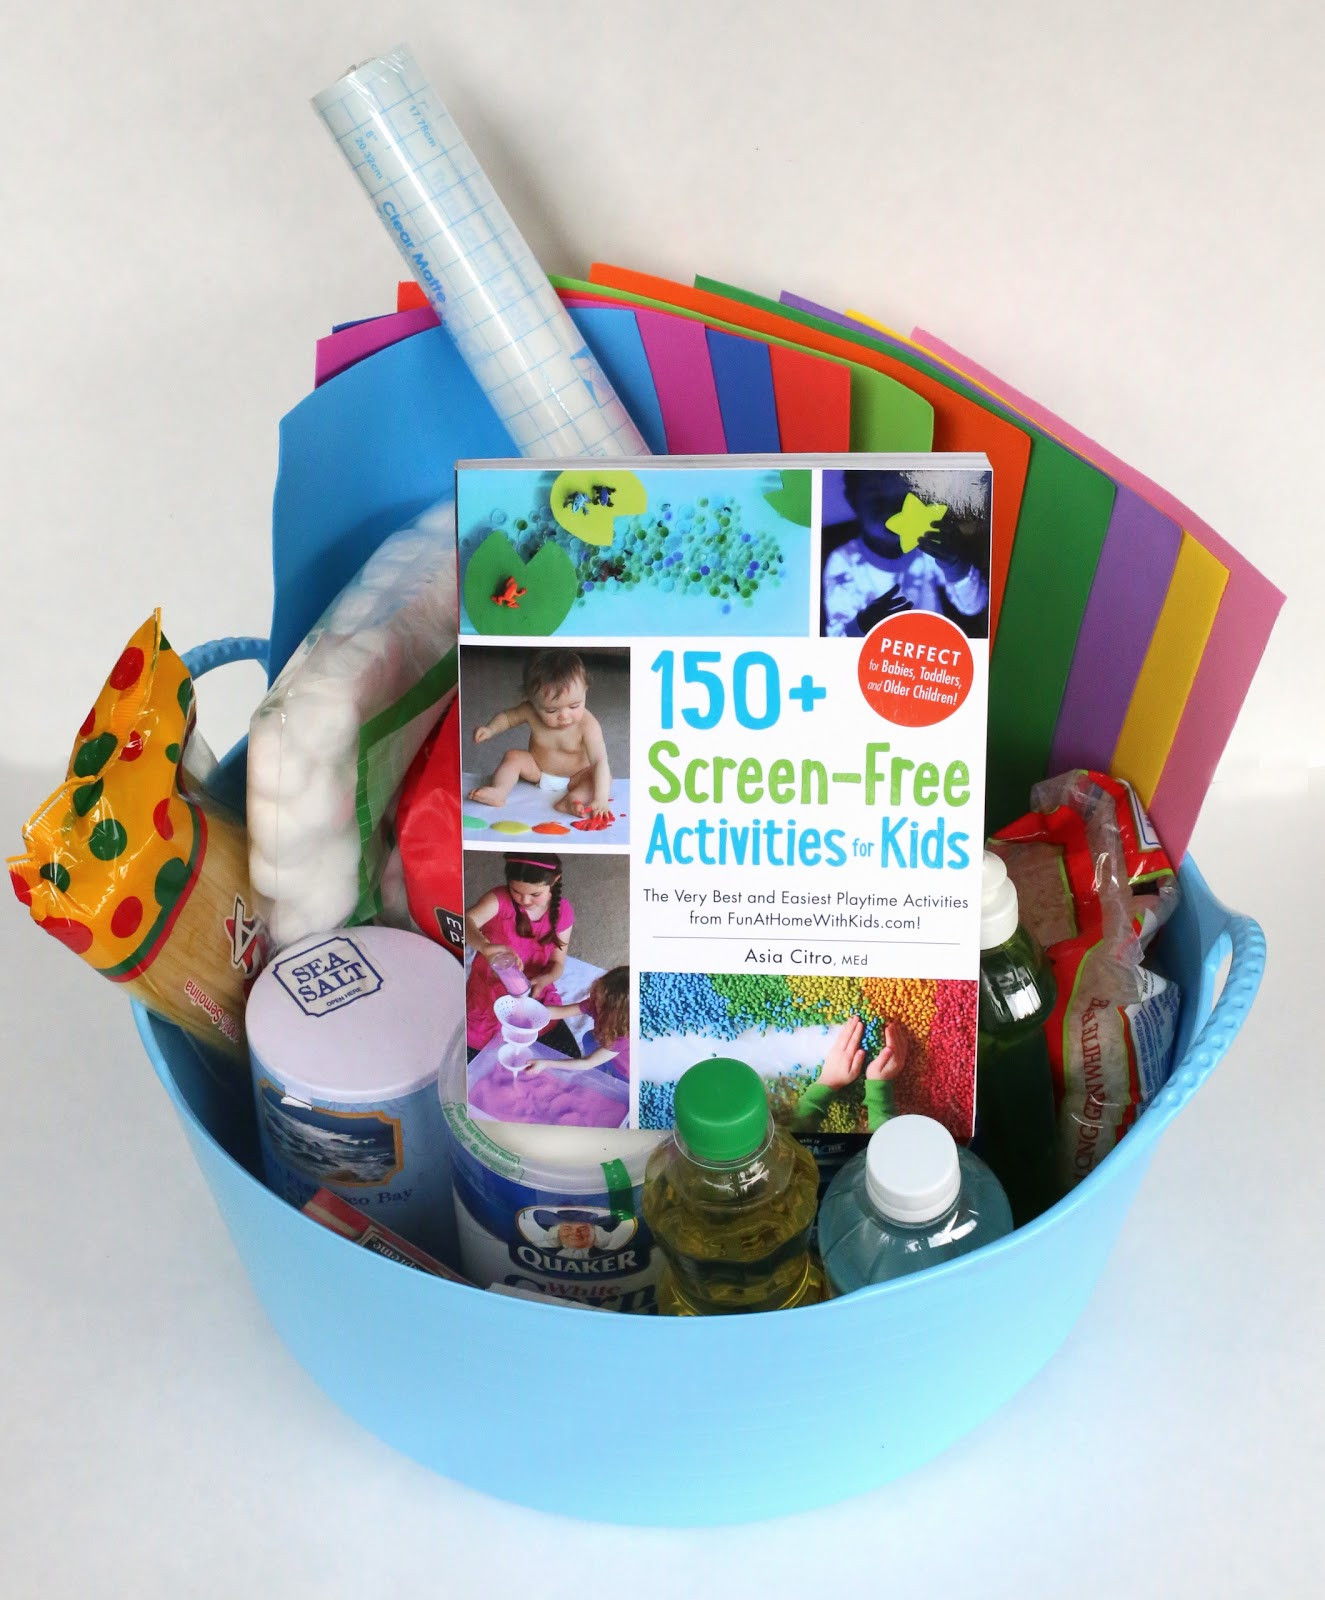 Unique Birthday Gifts For Kids
 DIY Sensory Kits Creative Gifts for Kids